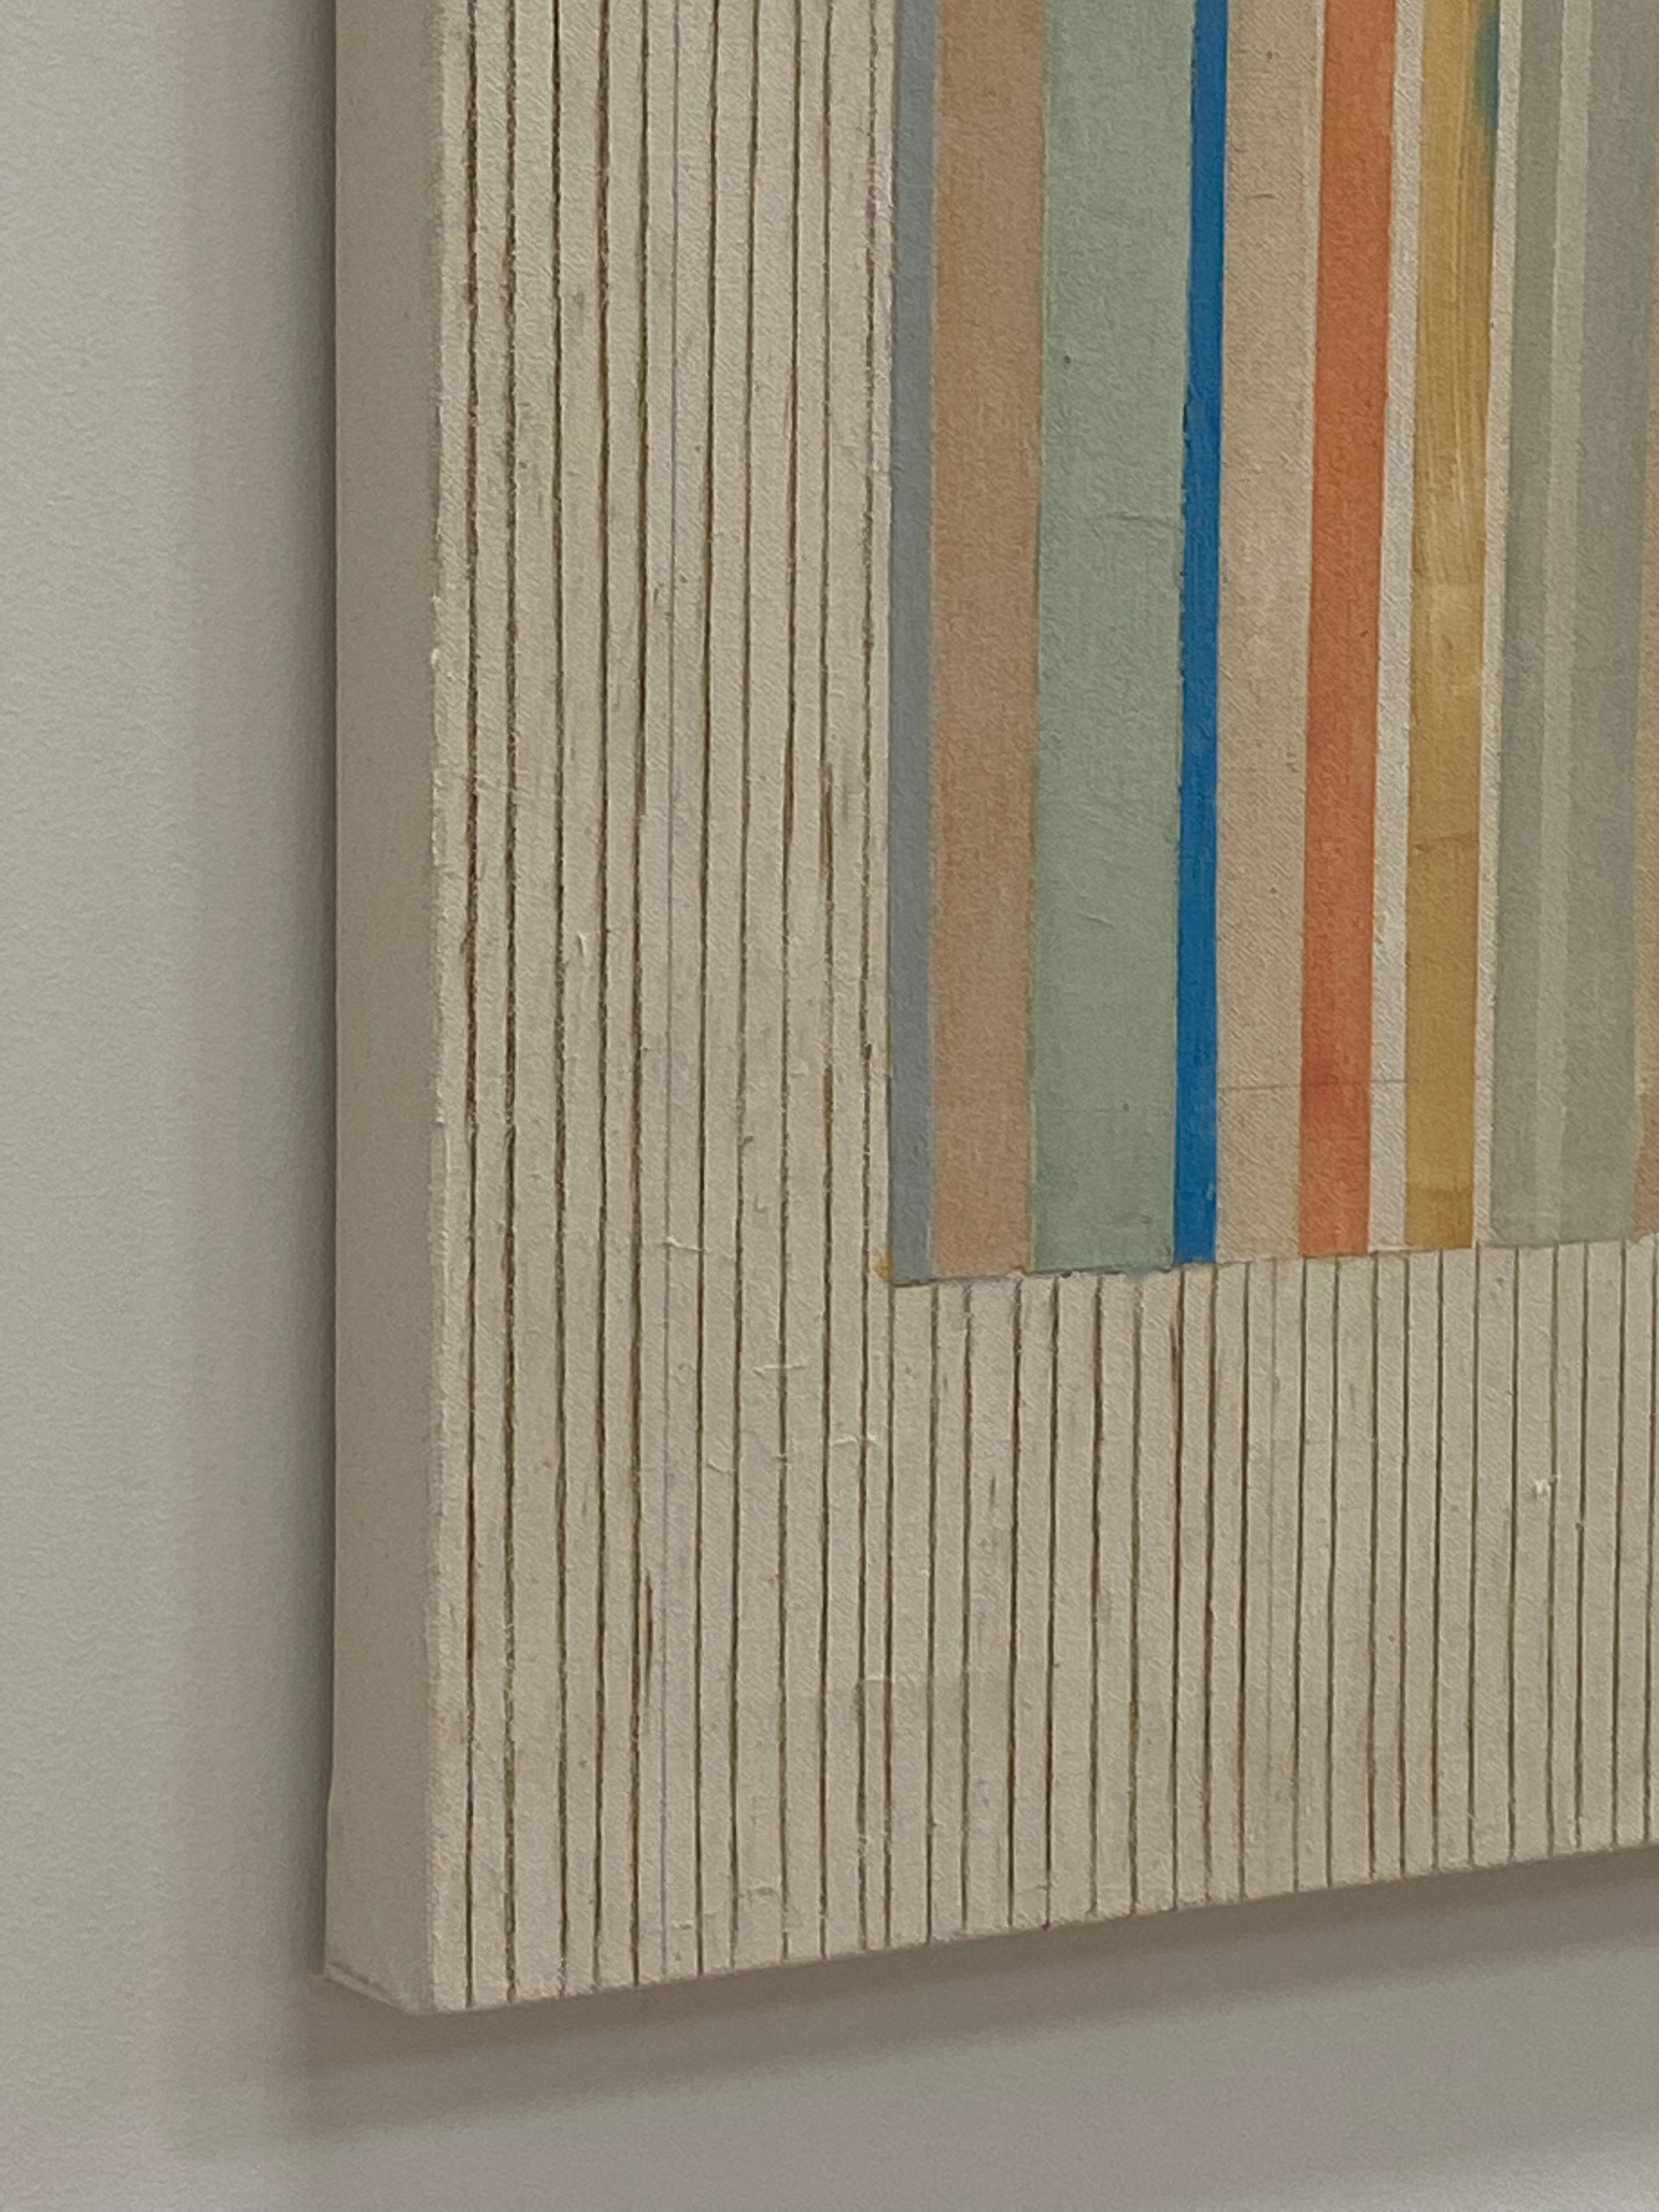 Clean and precise, carefully ordered stripes and blocks of color in orange, gray blue, pale yellow, blue and brown are lively and vibrant against the soft beige background. Signed, dated and titled on verso.

Elizabeth Gourlay’s work is a meditation